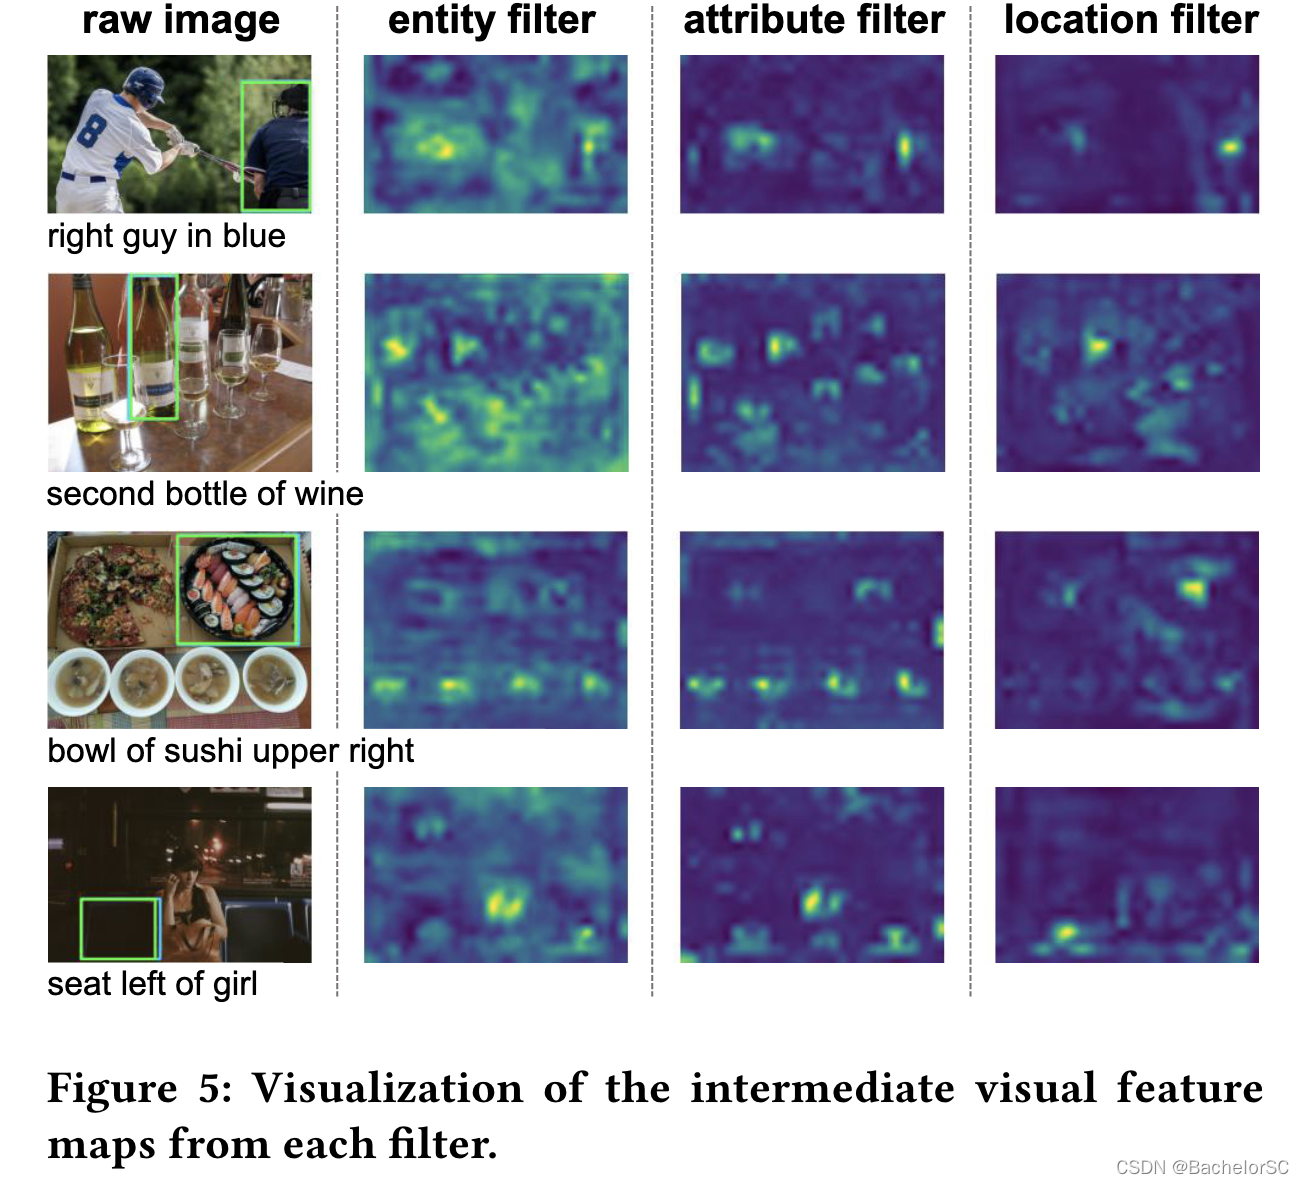 One-Stage Visual Grounding via Semantic-Aware Feature Filter